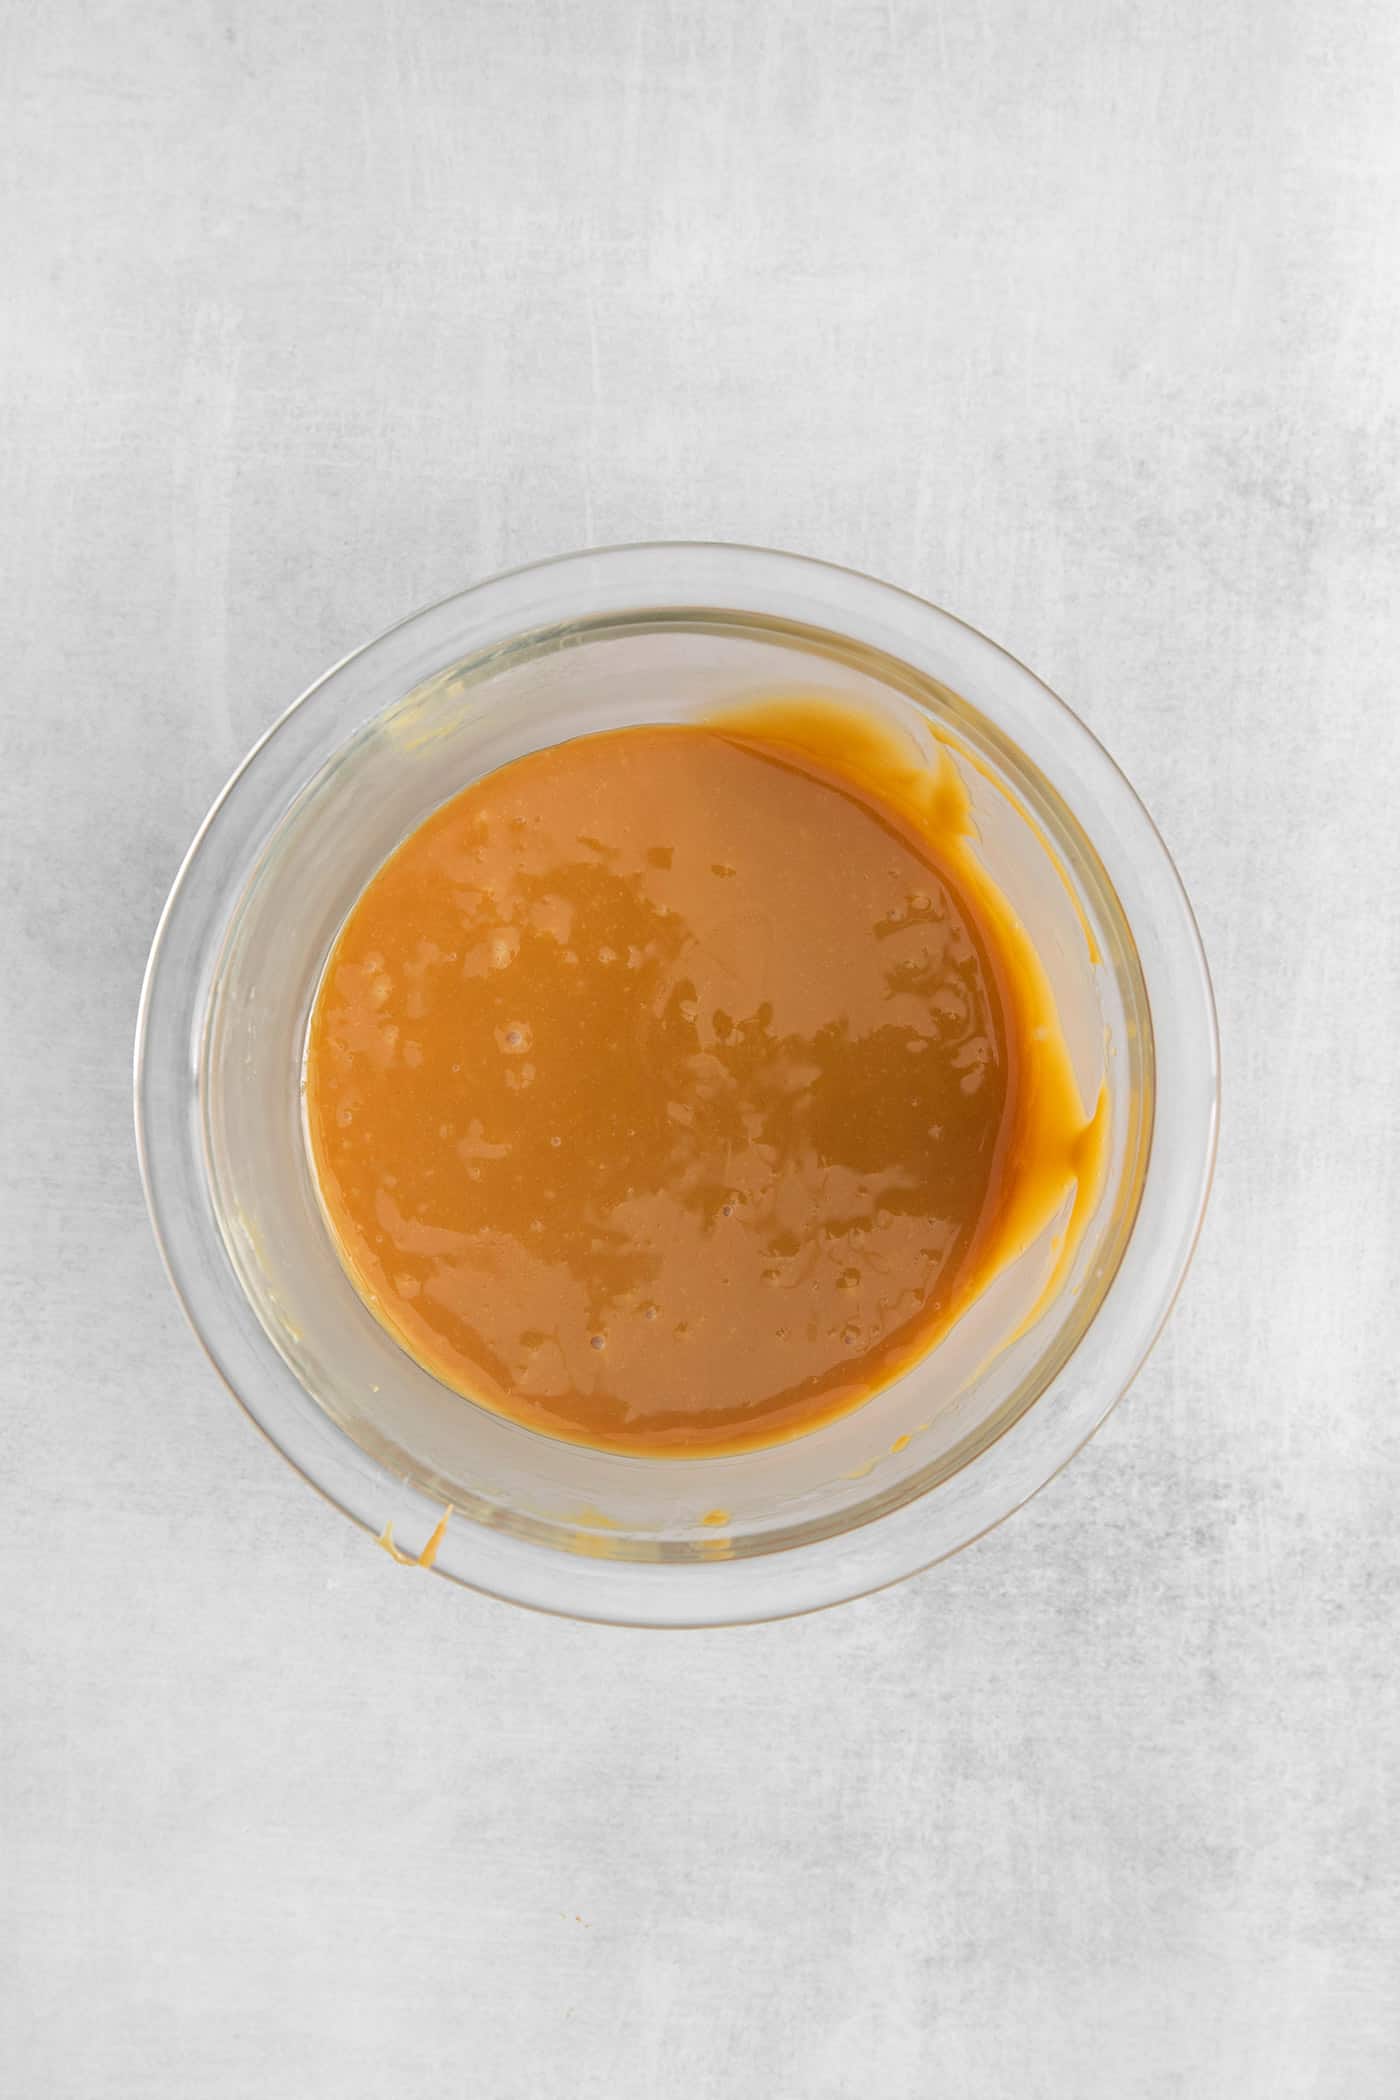 melted caramel mixture in a clear bowl